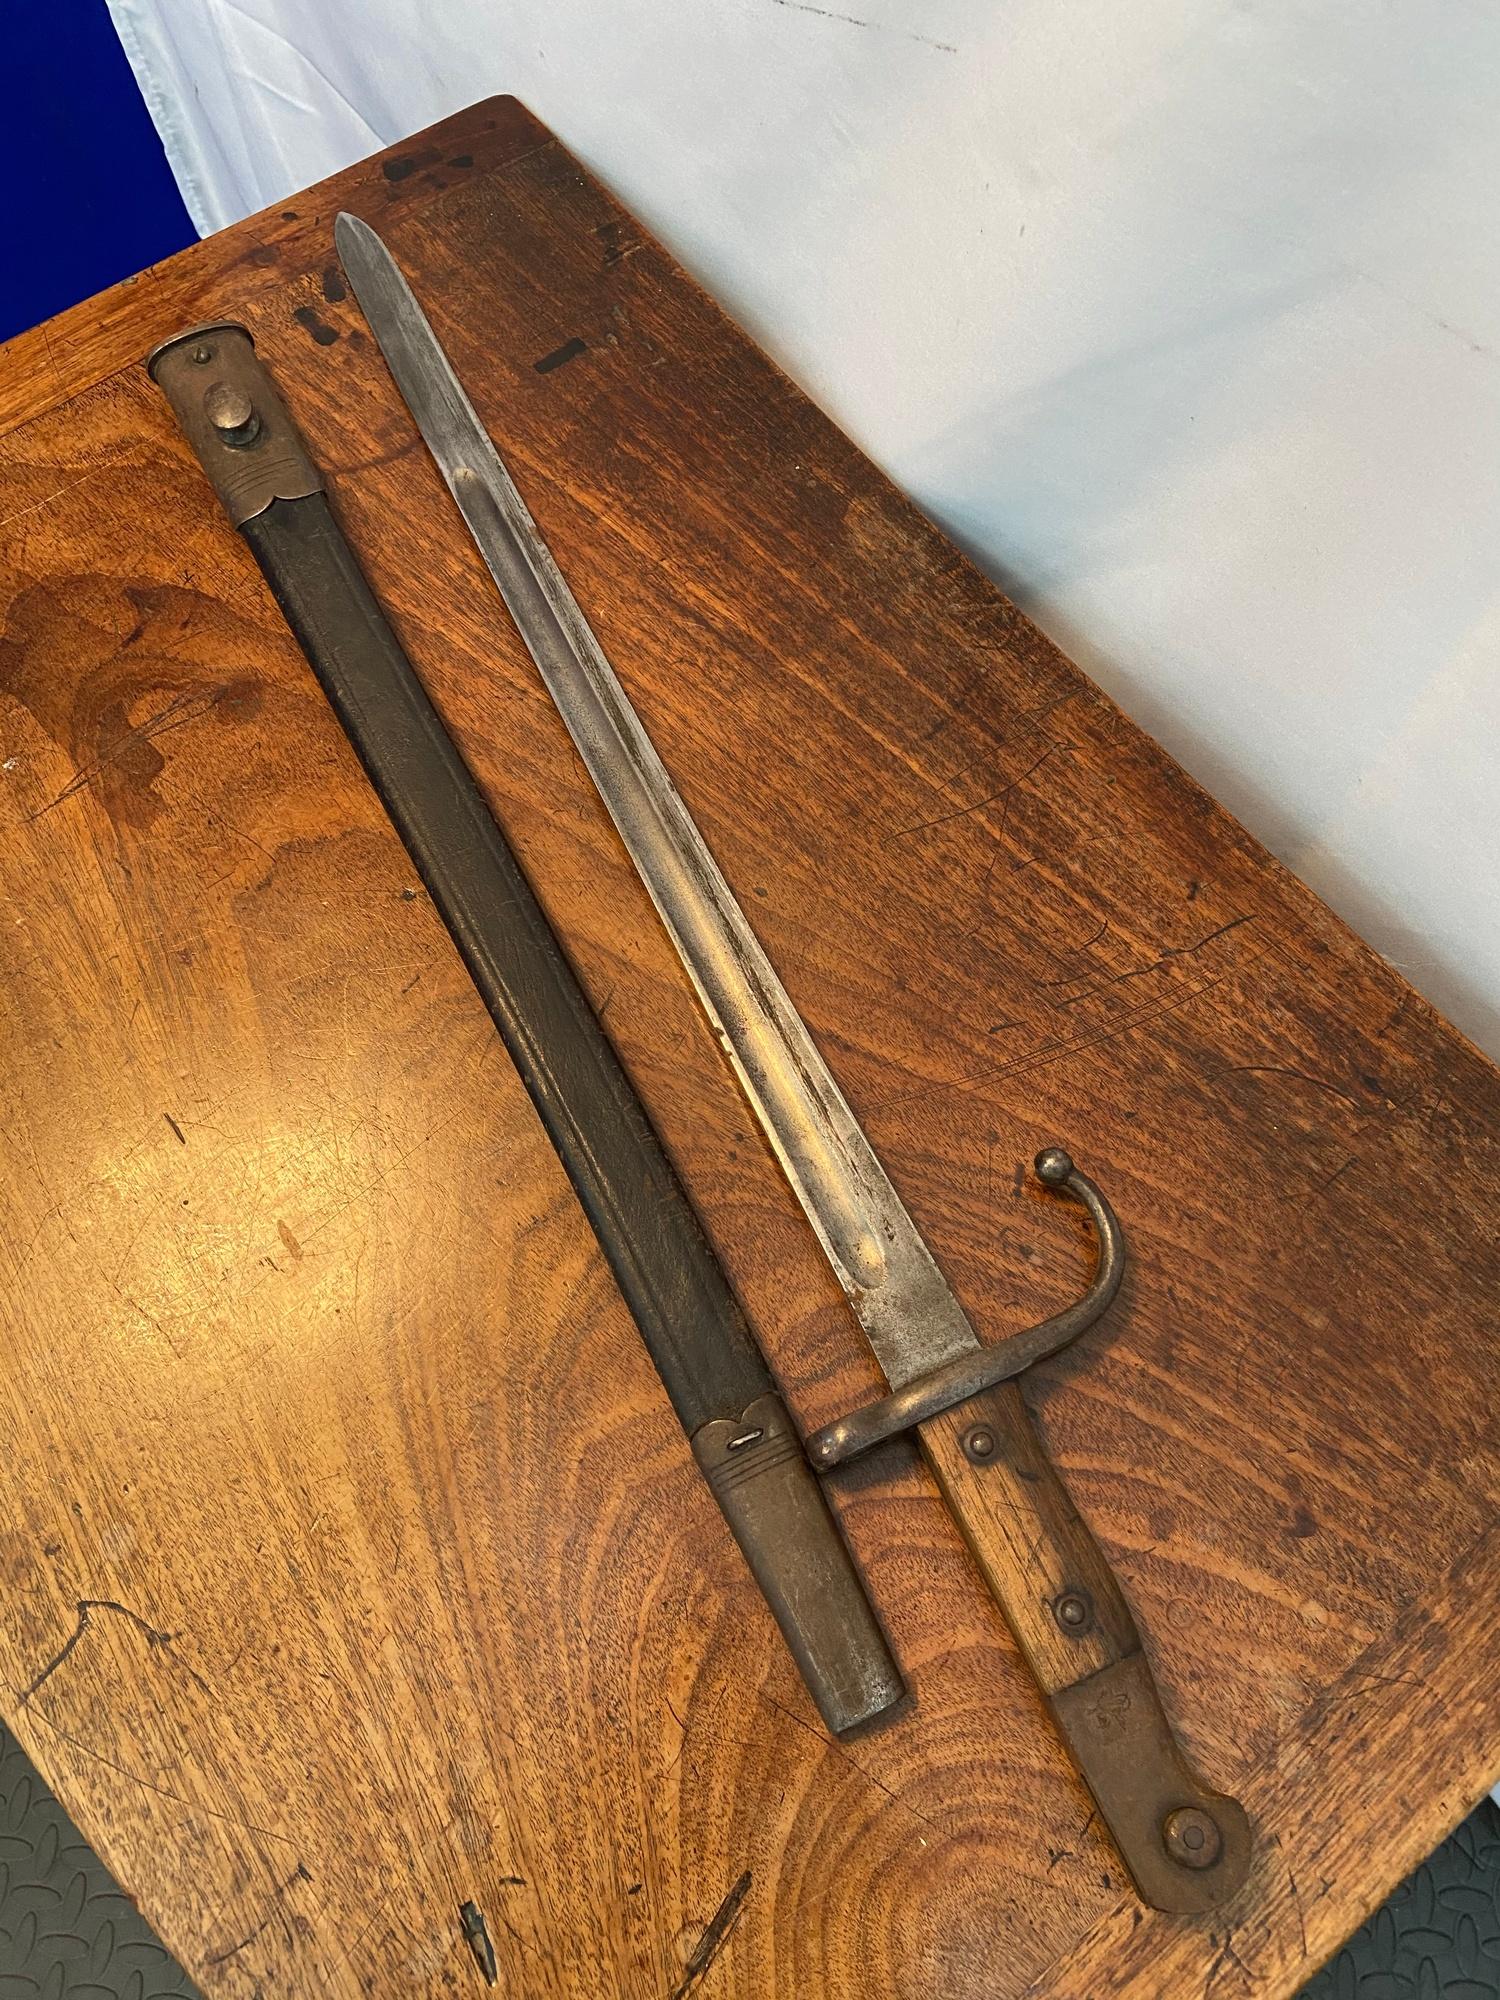 Model 1890 Turkish Mauser Bayonet with scabbard. Stamped with Turkish writing to the hilt of the